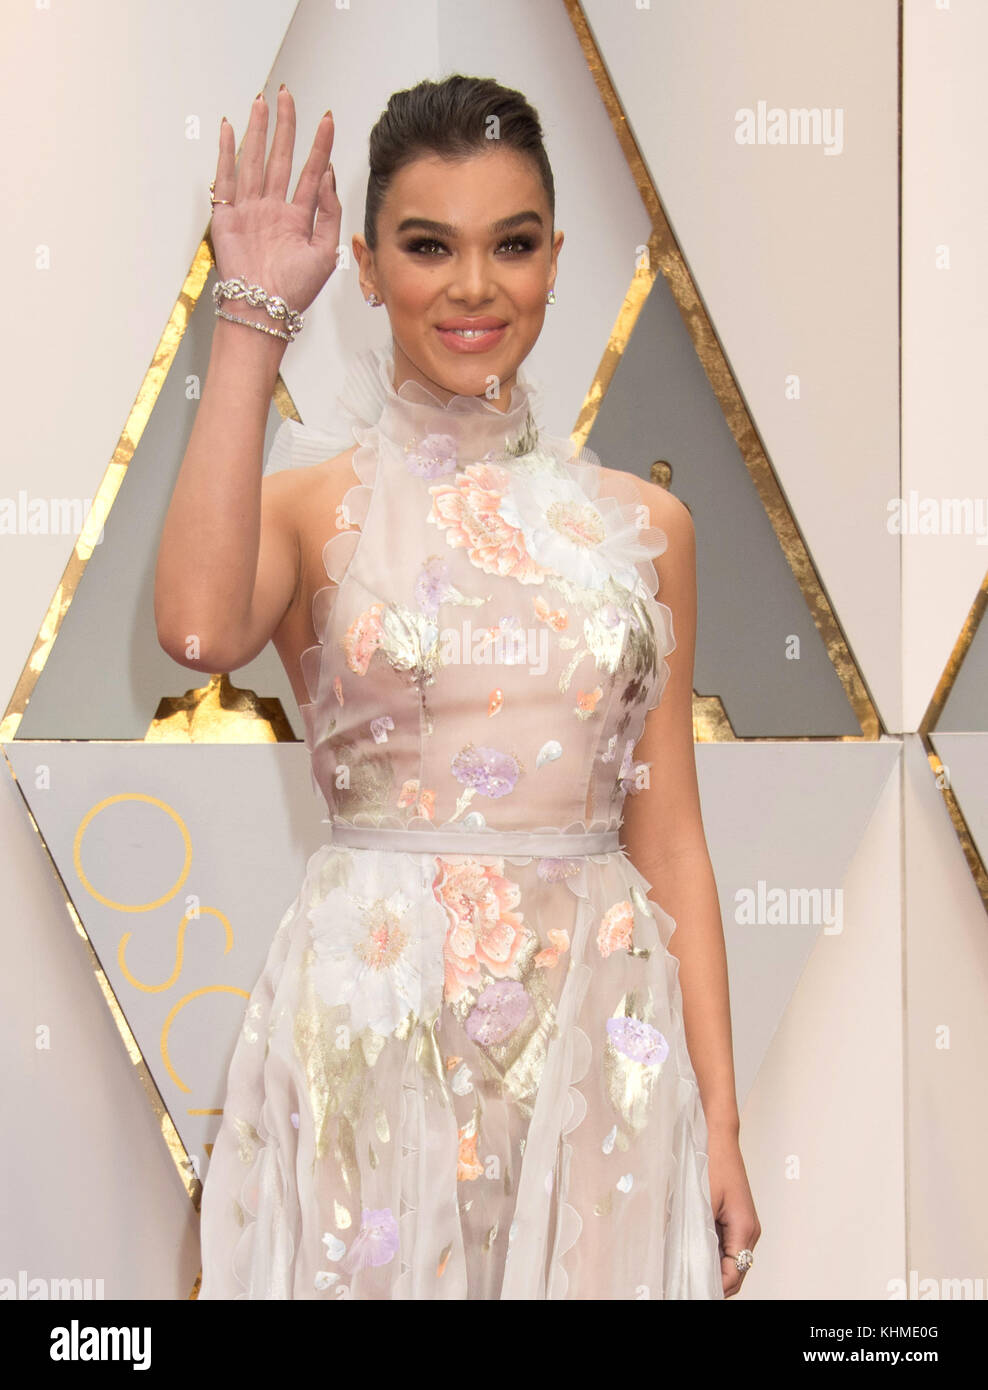 HOLLYWOOD, CA - FEBRUARY 26: Hailee Steinfeld attends the 89th Annual Academy Awards at Hollywood & Highland Center on February 26, 2017 in Hollywood, California  People:  Hailee Steinfeld  Transmission Ref:  MNC Stock Photo